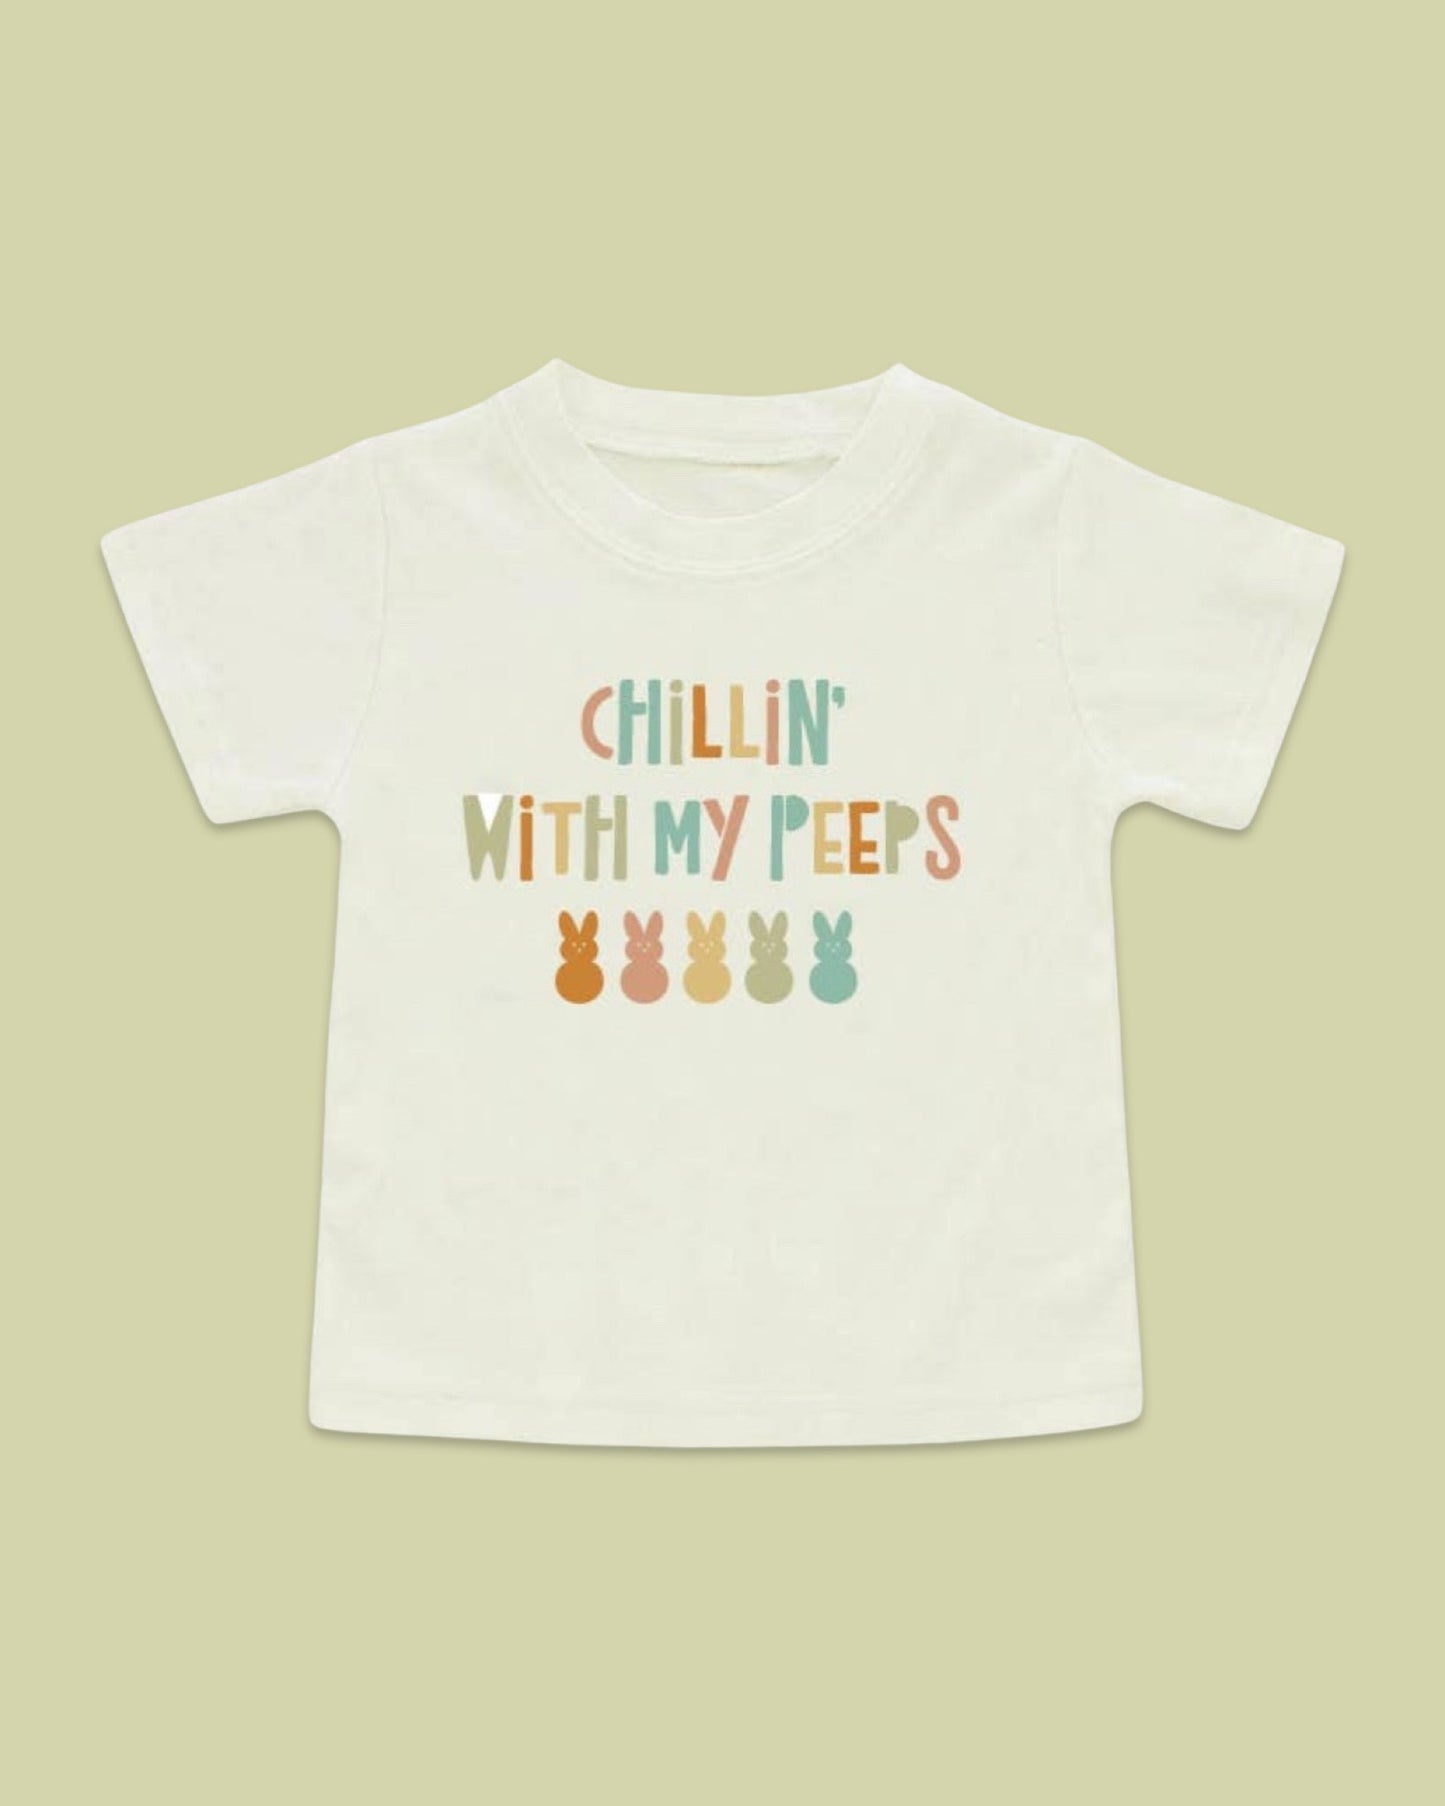 Chillin’ With My Peeps, Kids Easter Tee Shirt